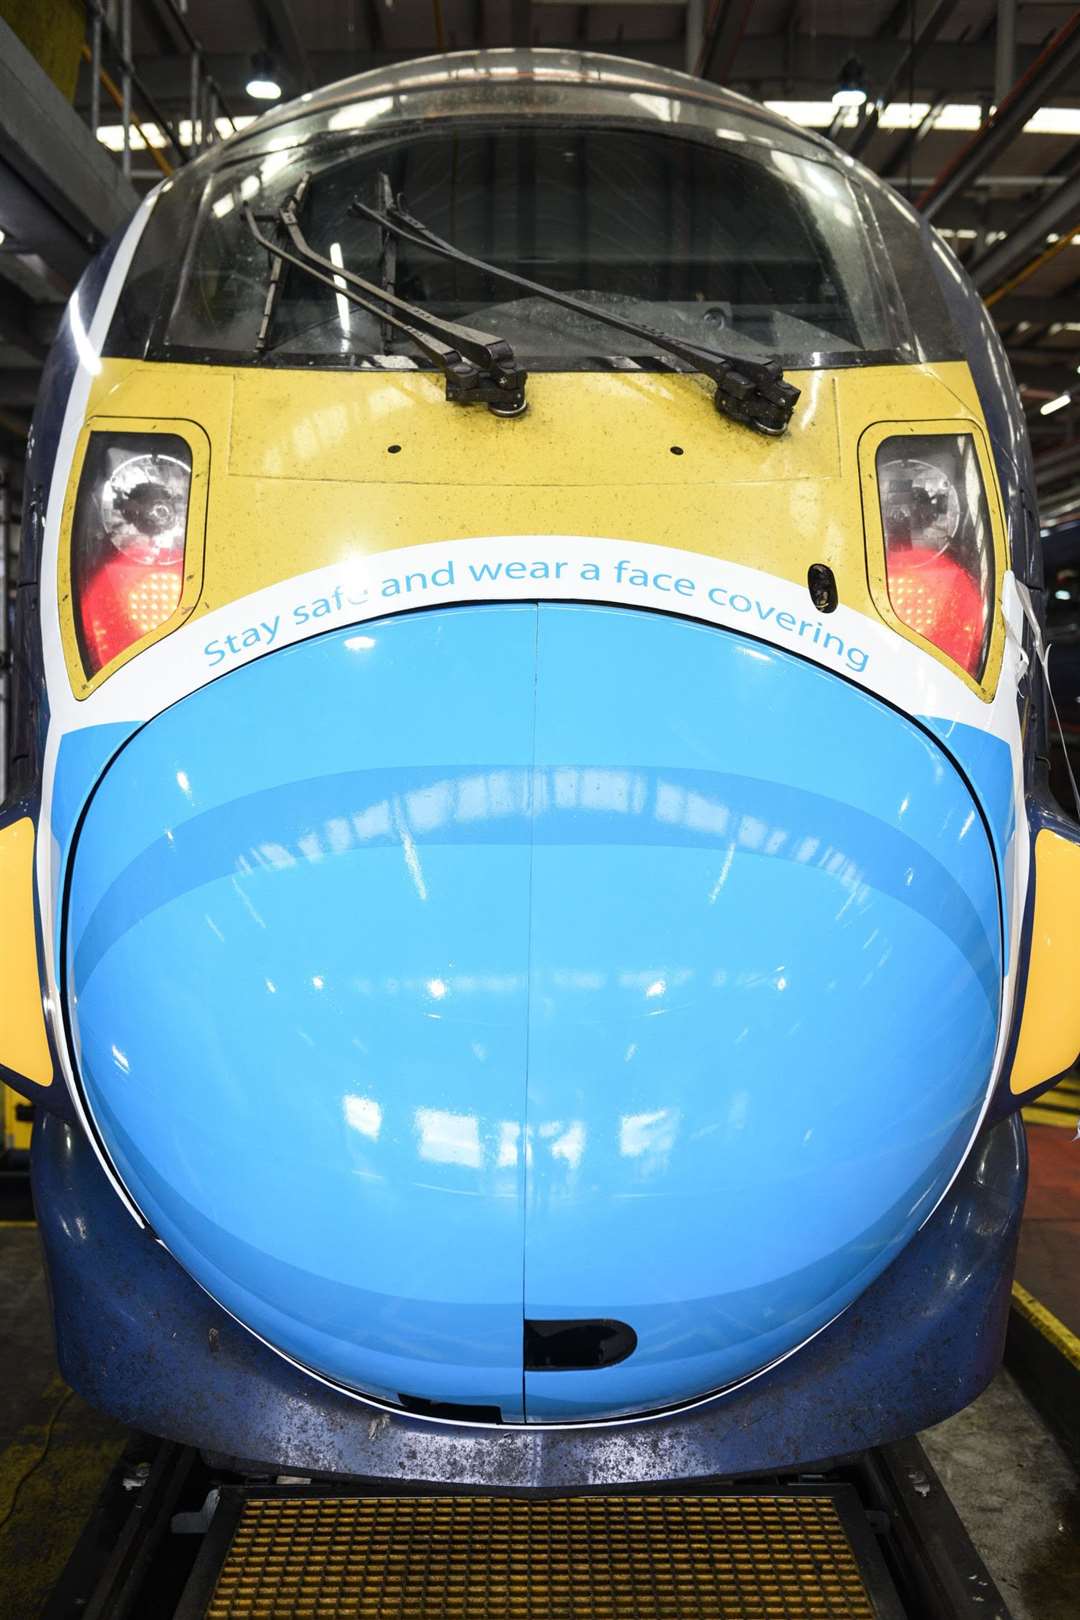 Southeastern unveils face mask artwork on high speed service